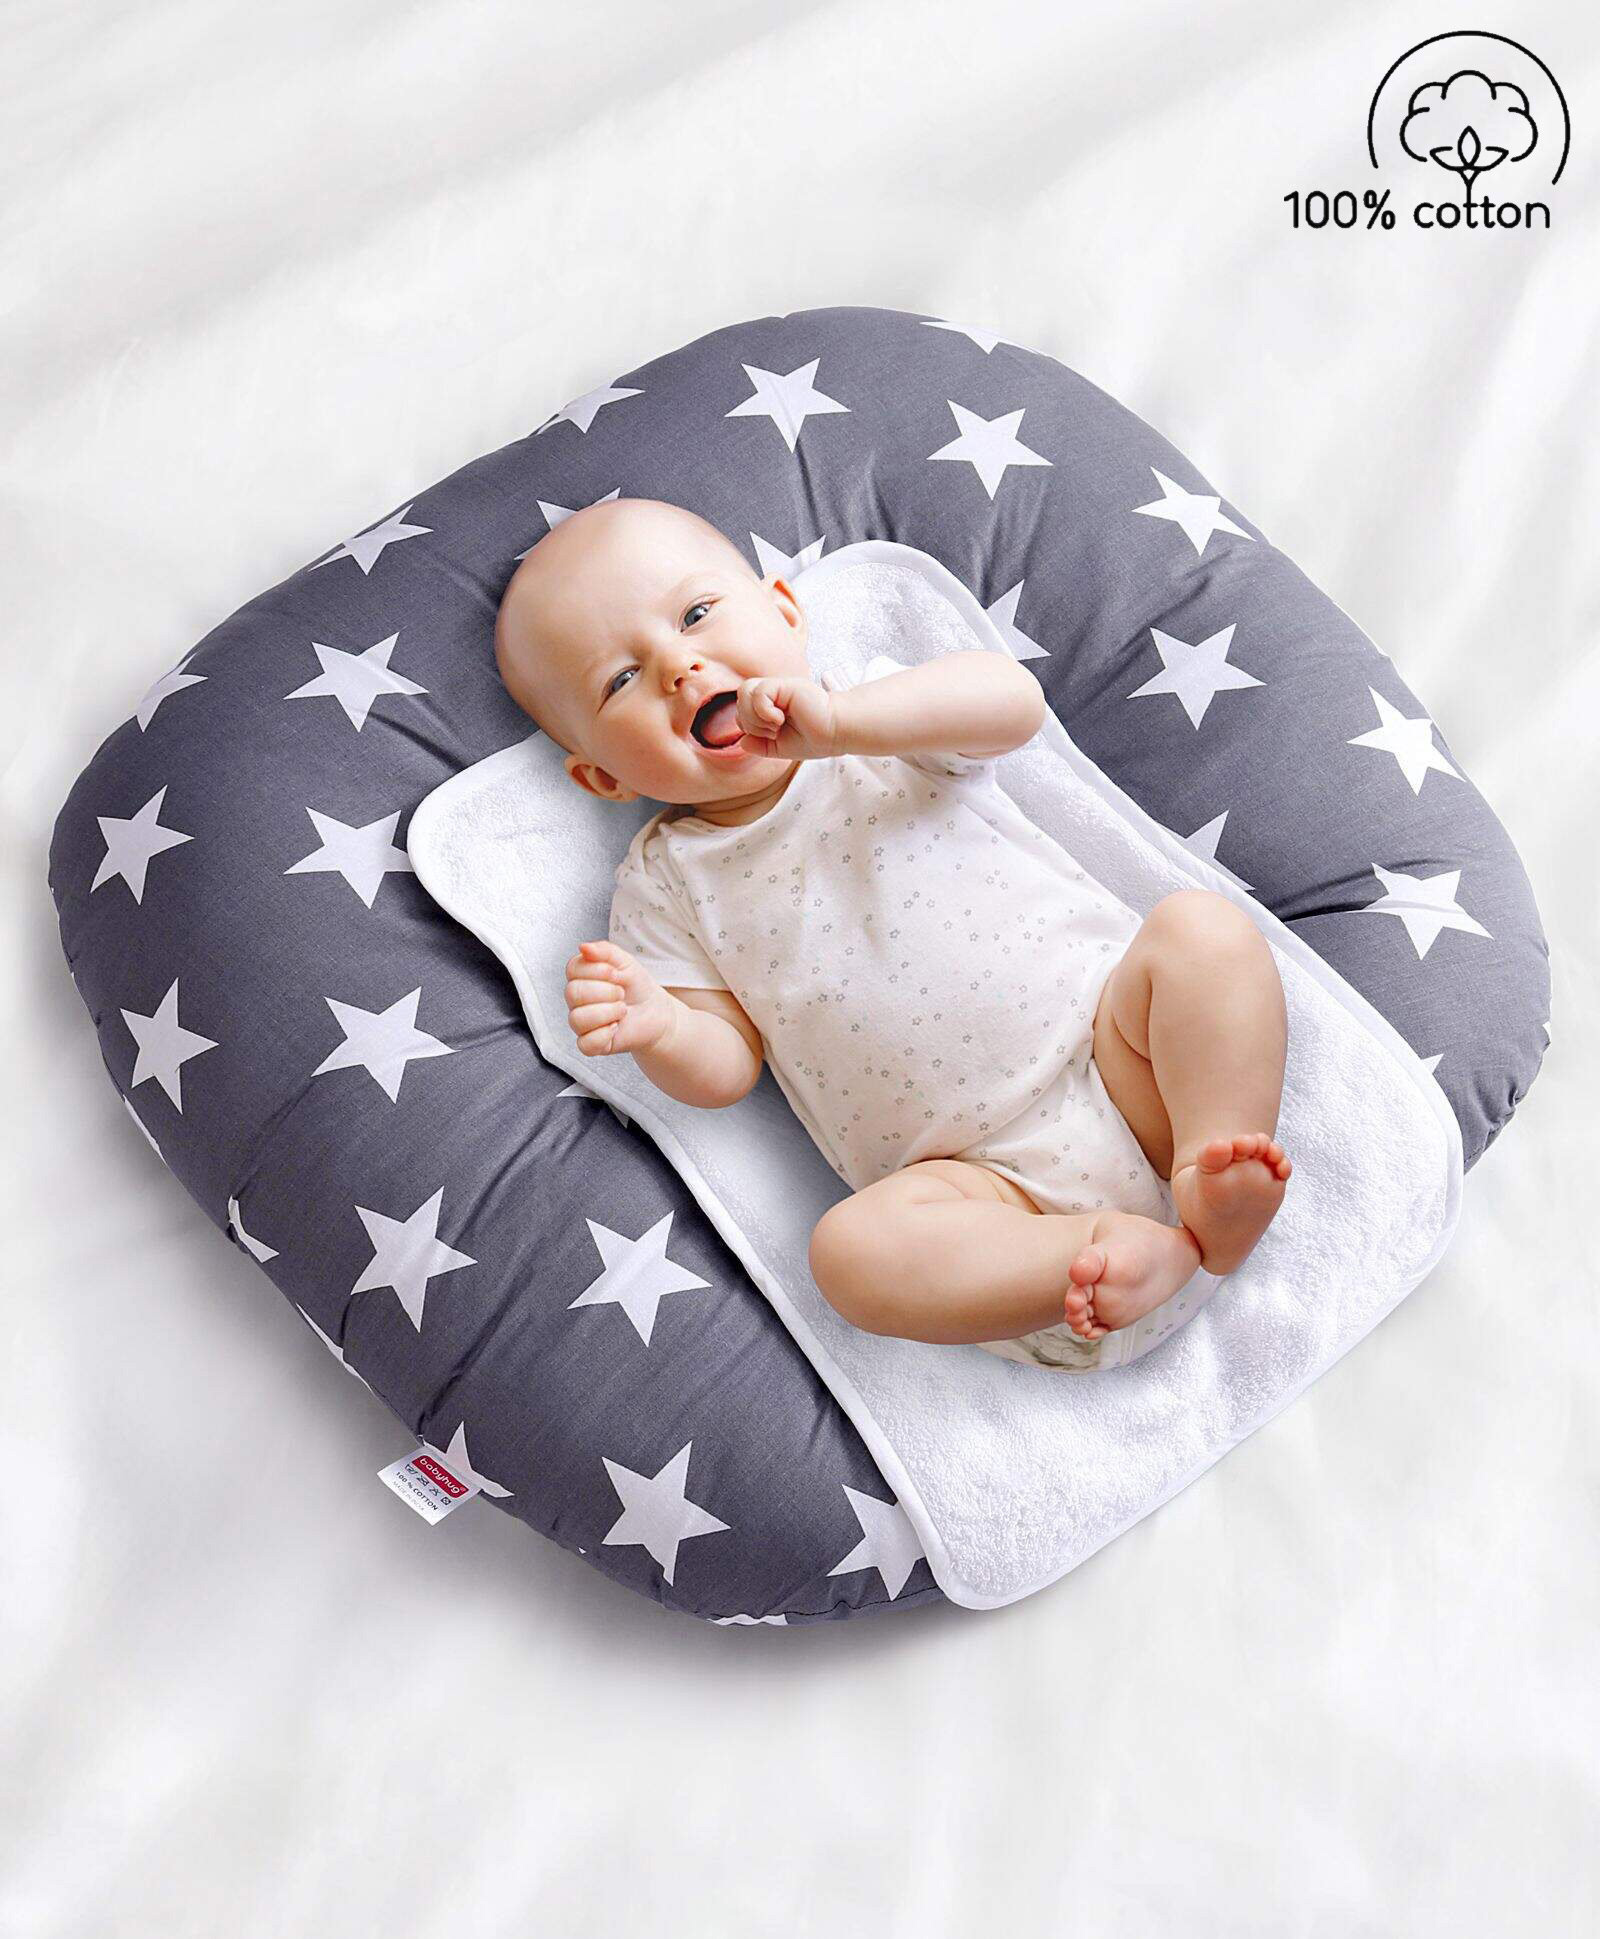 Removable Breathable Reusable Baby Lounger Covers 2 Packs Organic Cotton Lounger Cover for Boys Girls Newborn Essentials Competible with Organic Baby Lounger 